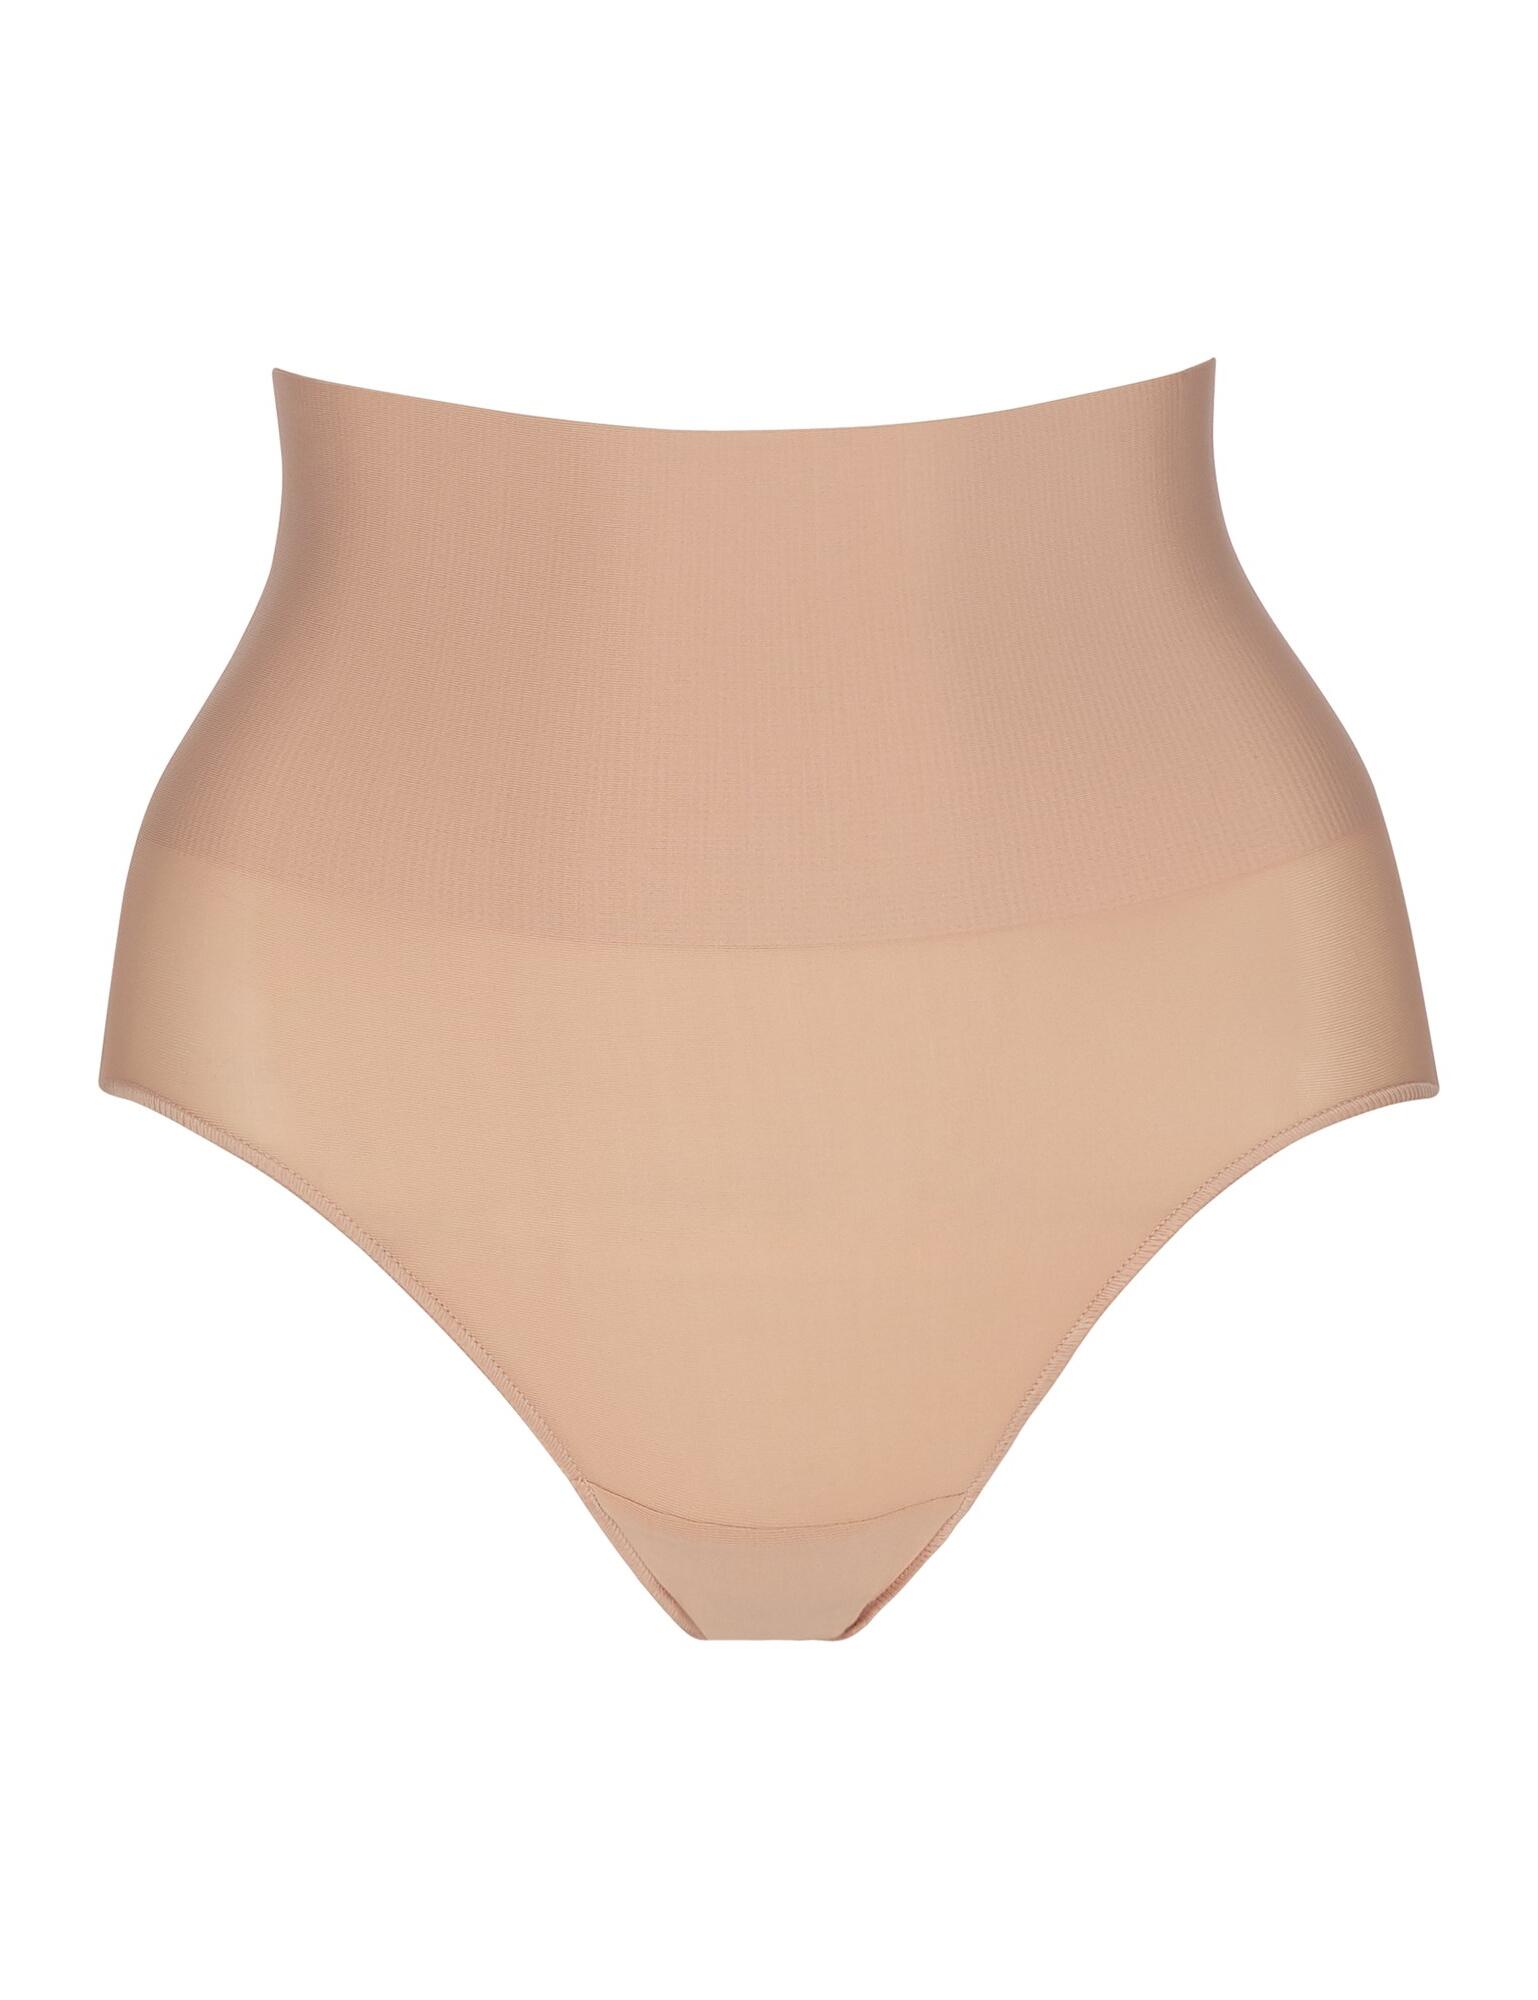 Maidenform: Tame Your Tummy Tailored Brief | Nude | Uplifted Lingerie